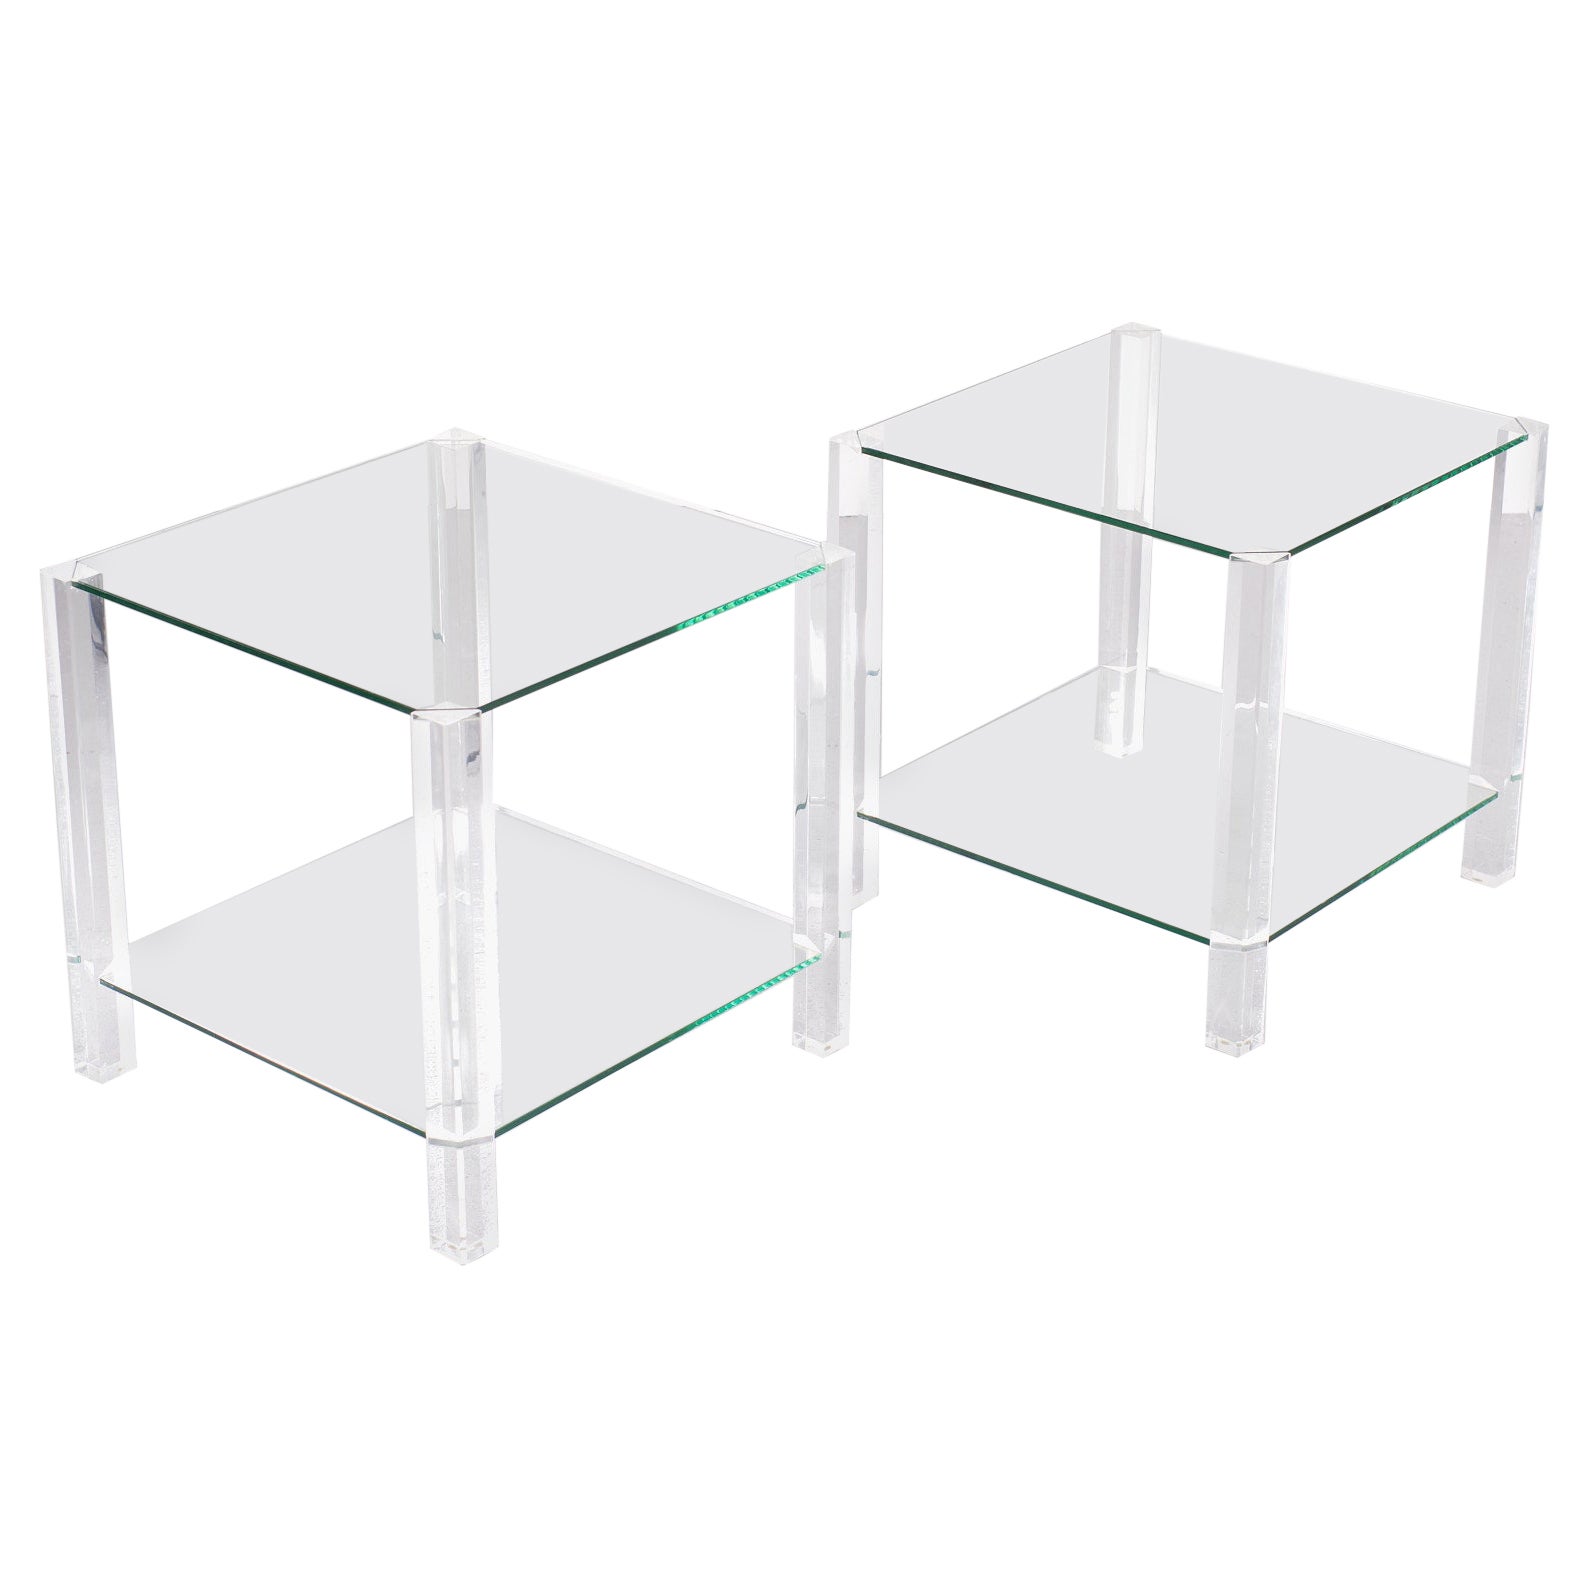 Two Tier Lucite Glass Square Side Tables, 1970s, France For Sale